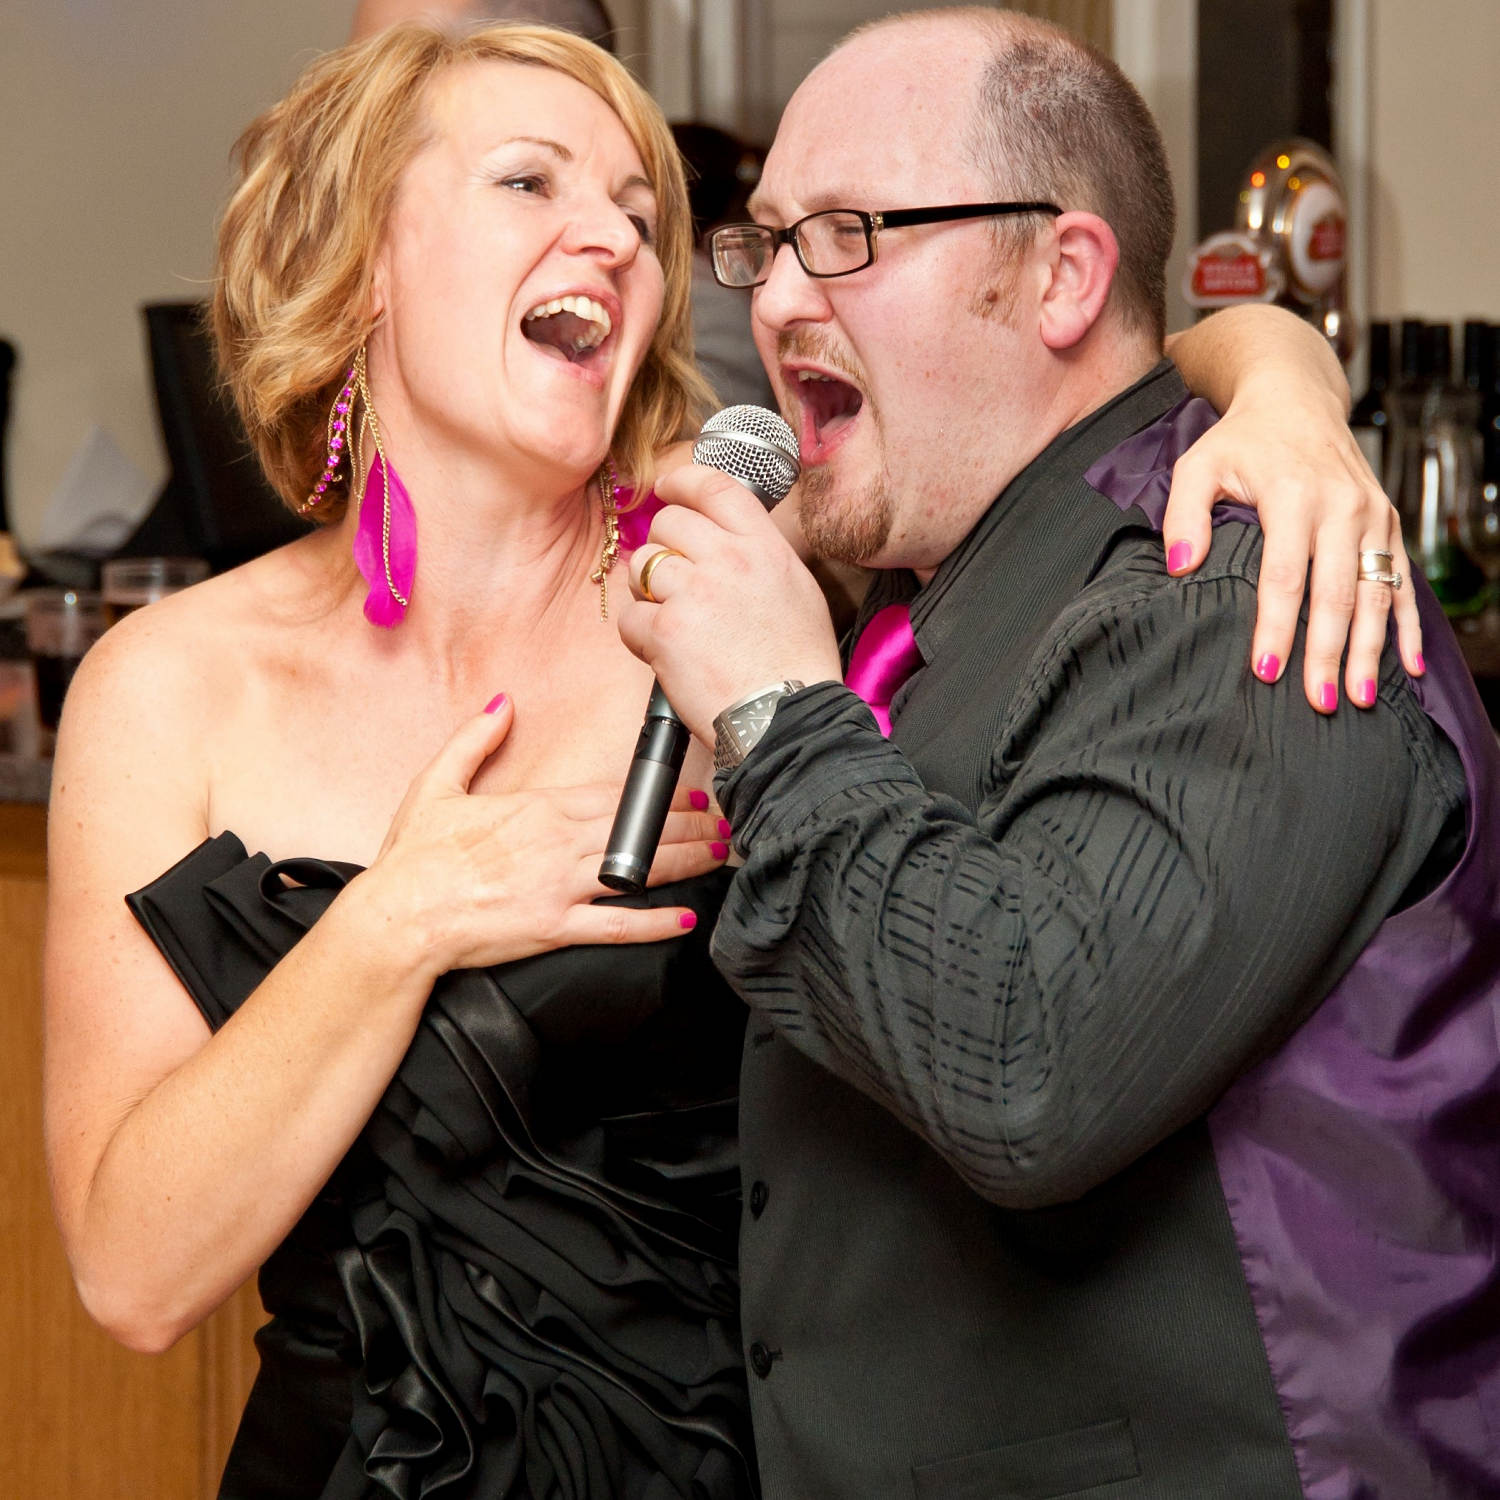 A female party guest sings along with her arm draped over shoulders of Jon Paul singer at wedding reception in wales.